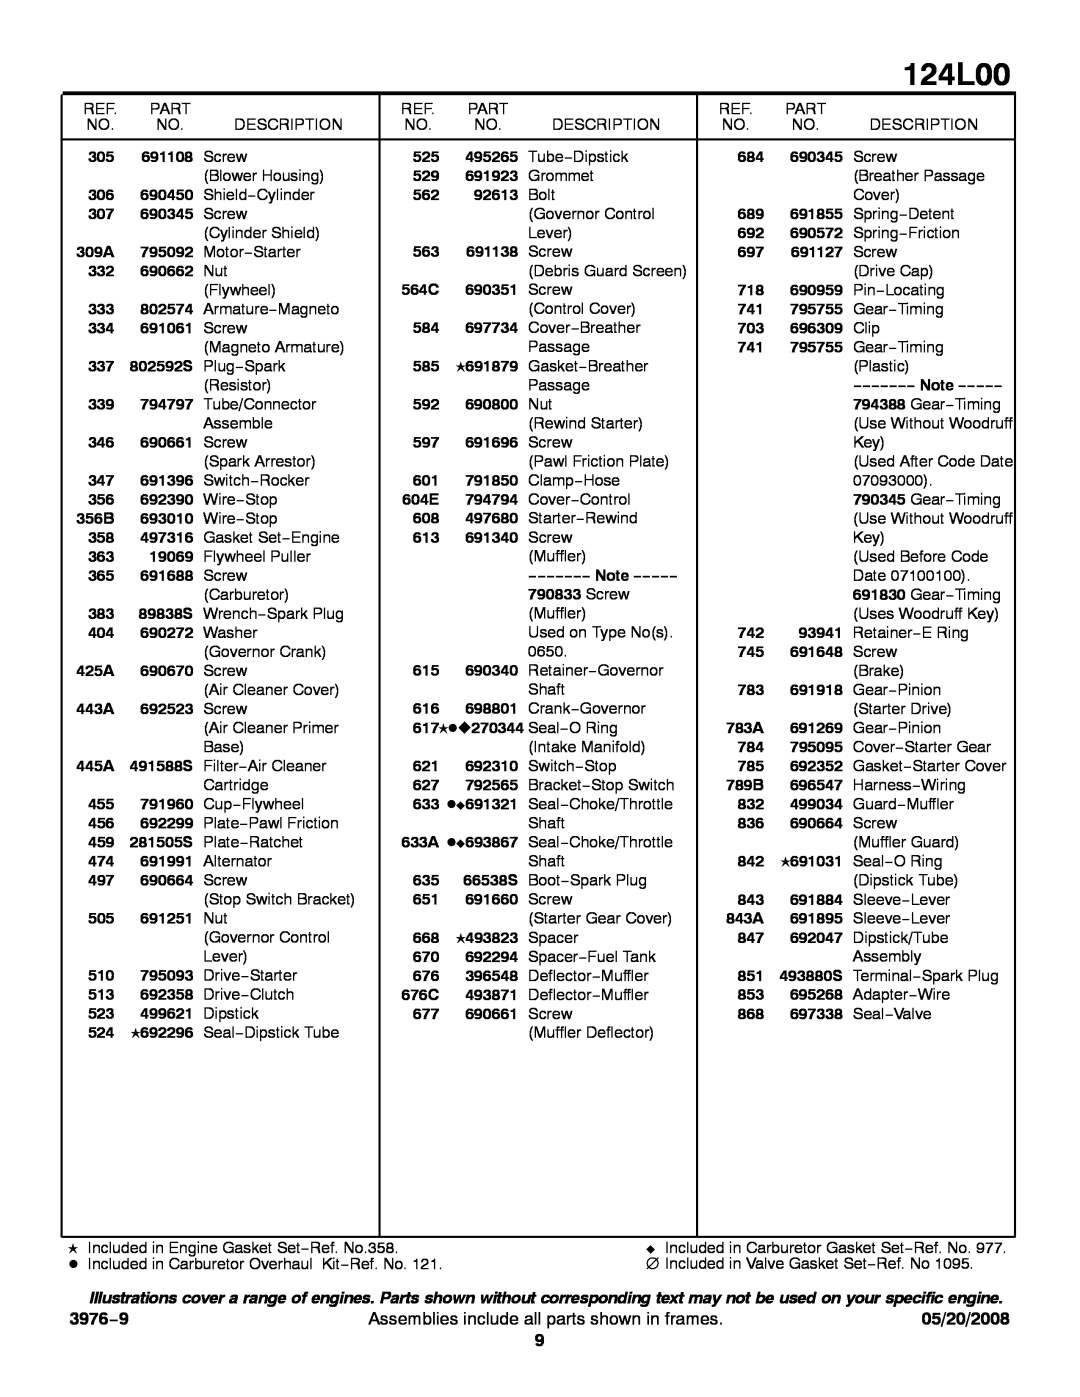 Briggs & Stratton 124L00 service manual 3976−9, Assemblies include all parts shown in frames, 05/20/2008 